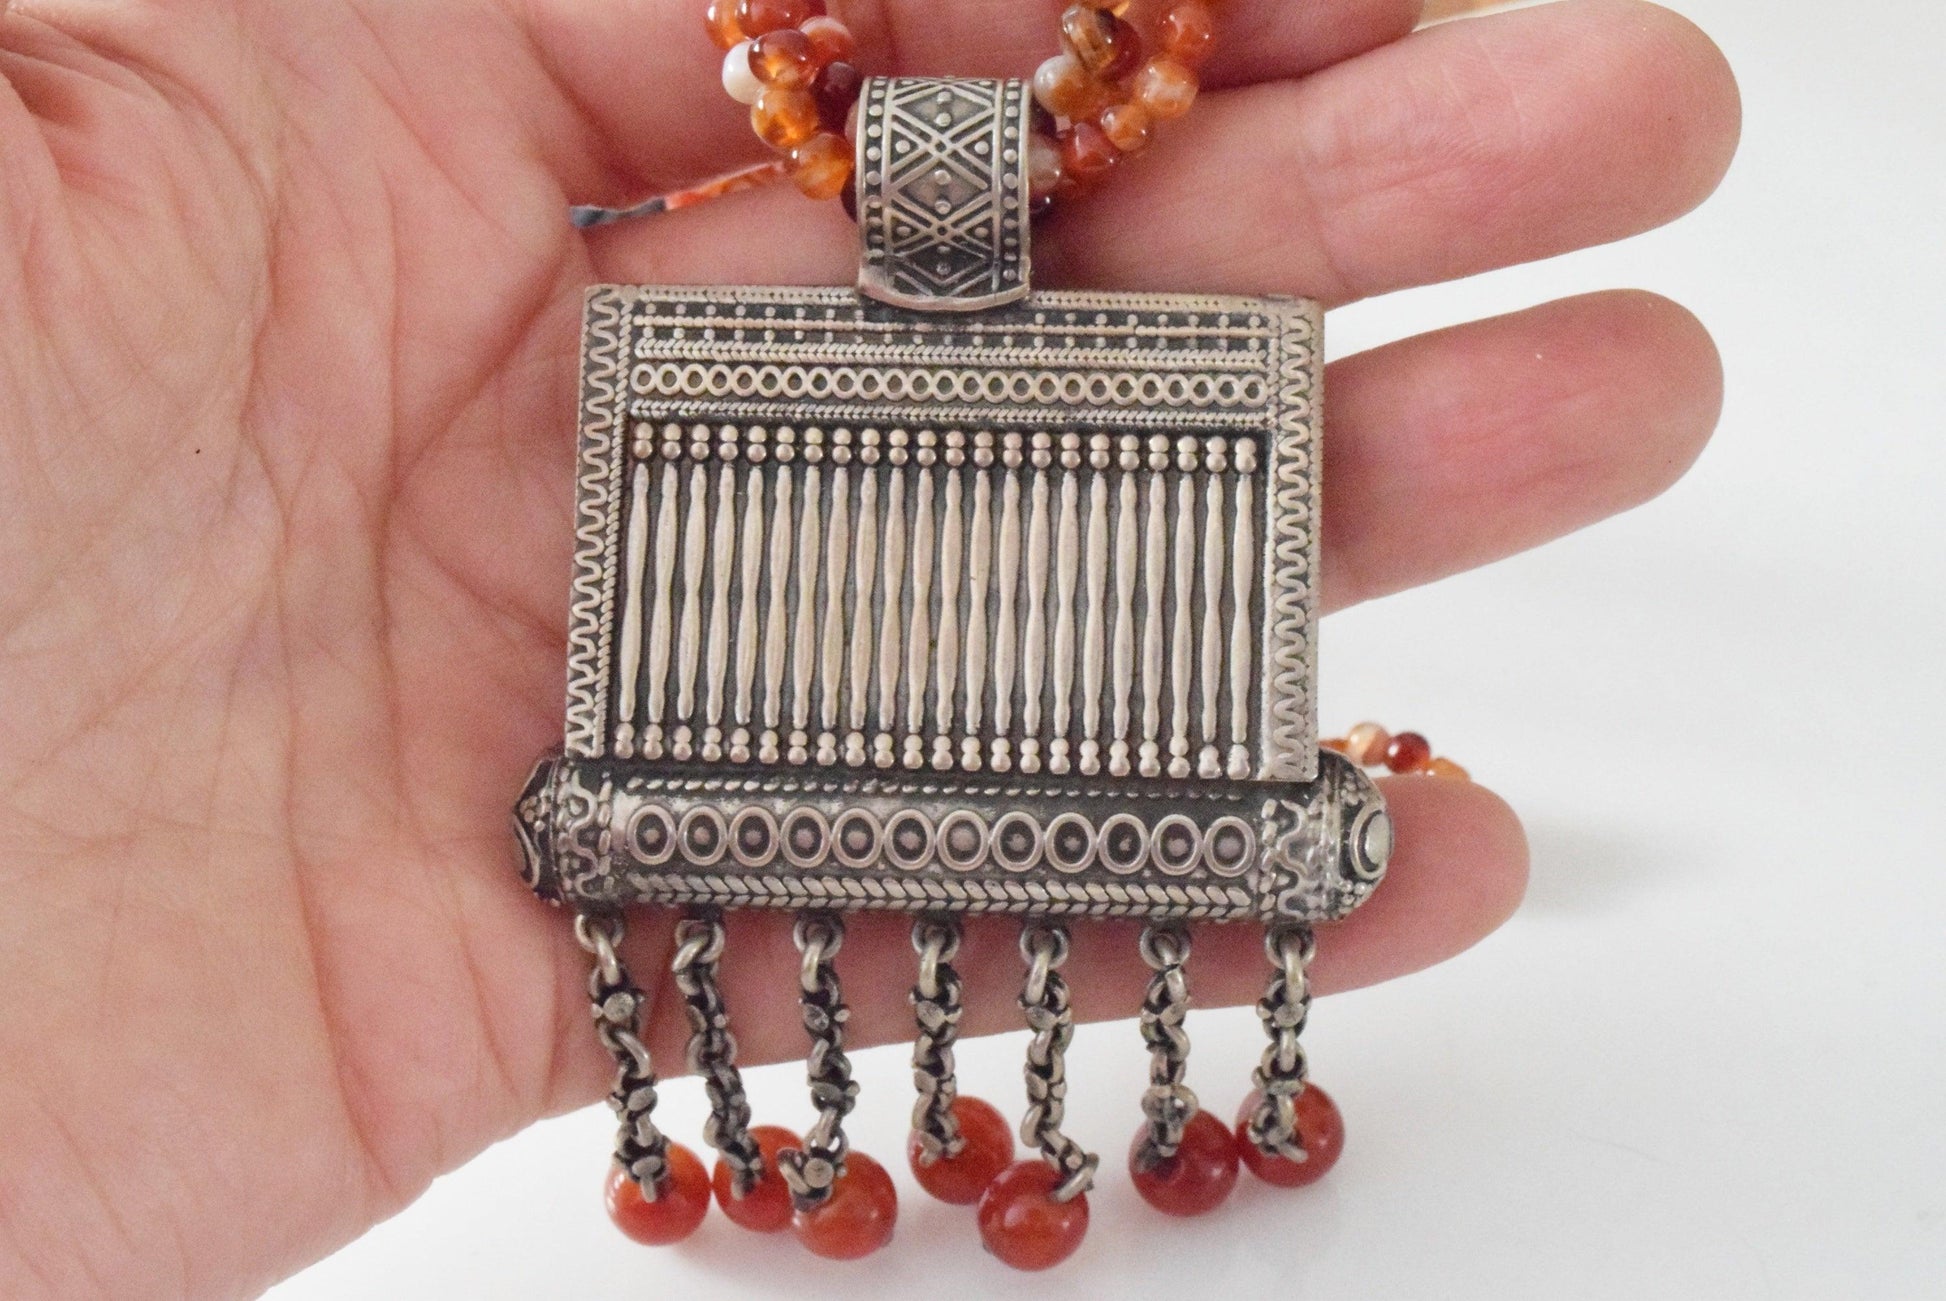 Vintage Egyptian Pendant Agate Bead Necklace with Agate Beads - Anteeka